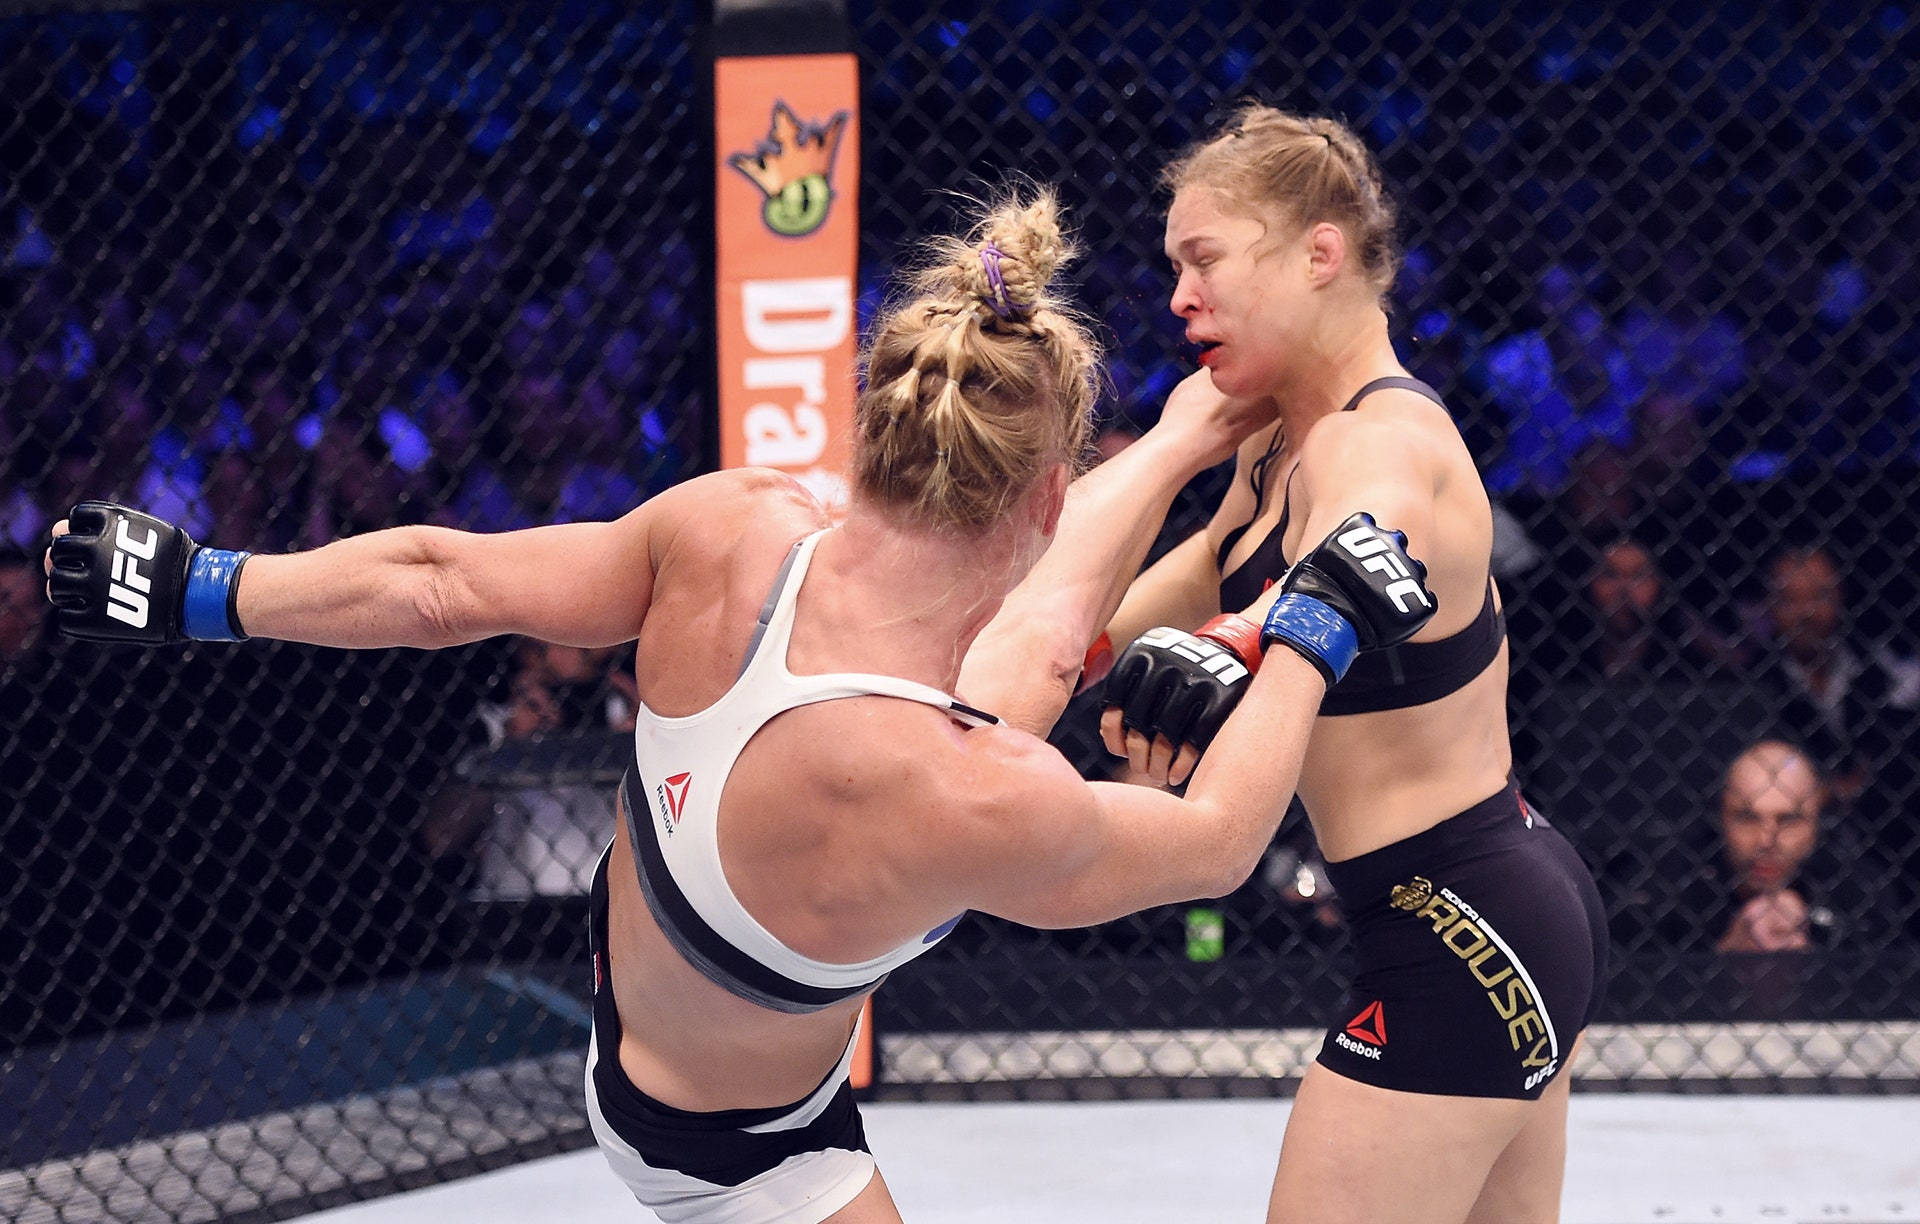 Holly Holm Kicks Ronda Rousey's Face Background